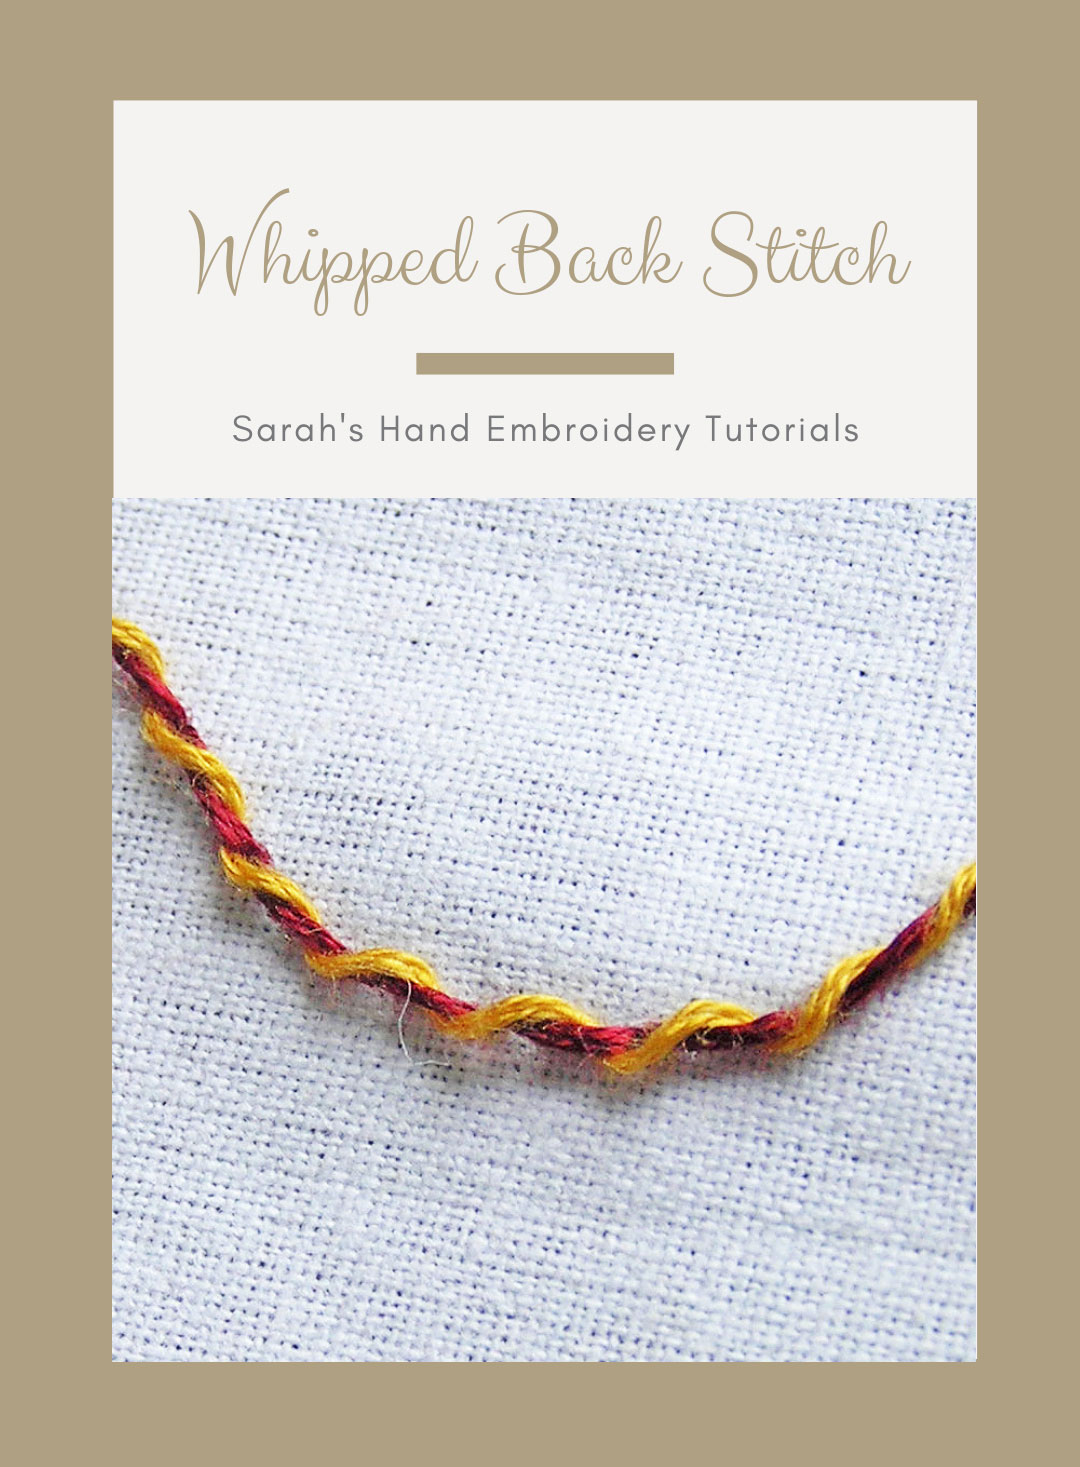 How to do the Whipped Back Stitch - Sarah's Hand Embroidery Tutorials